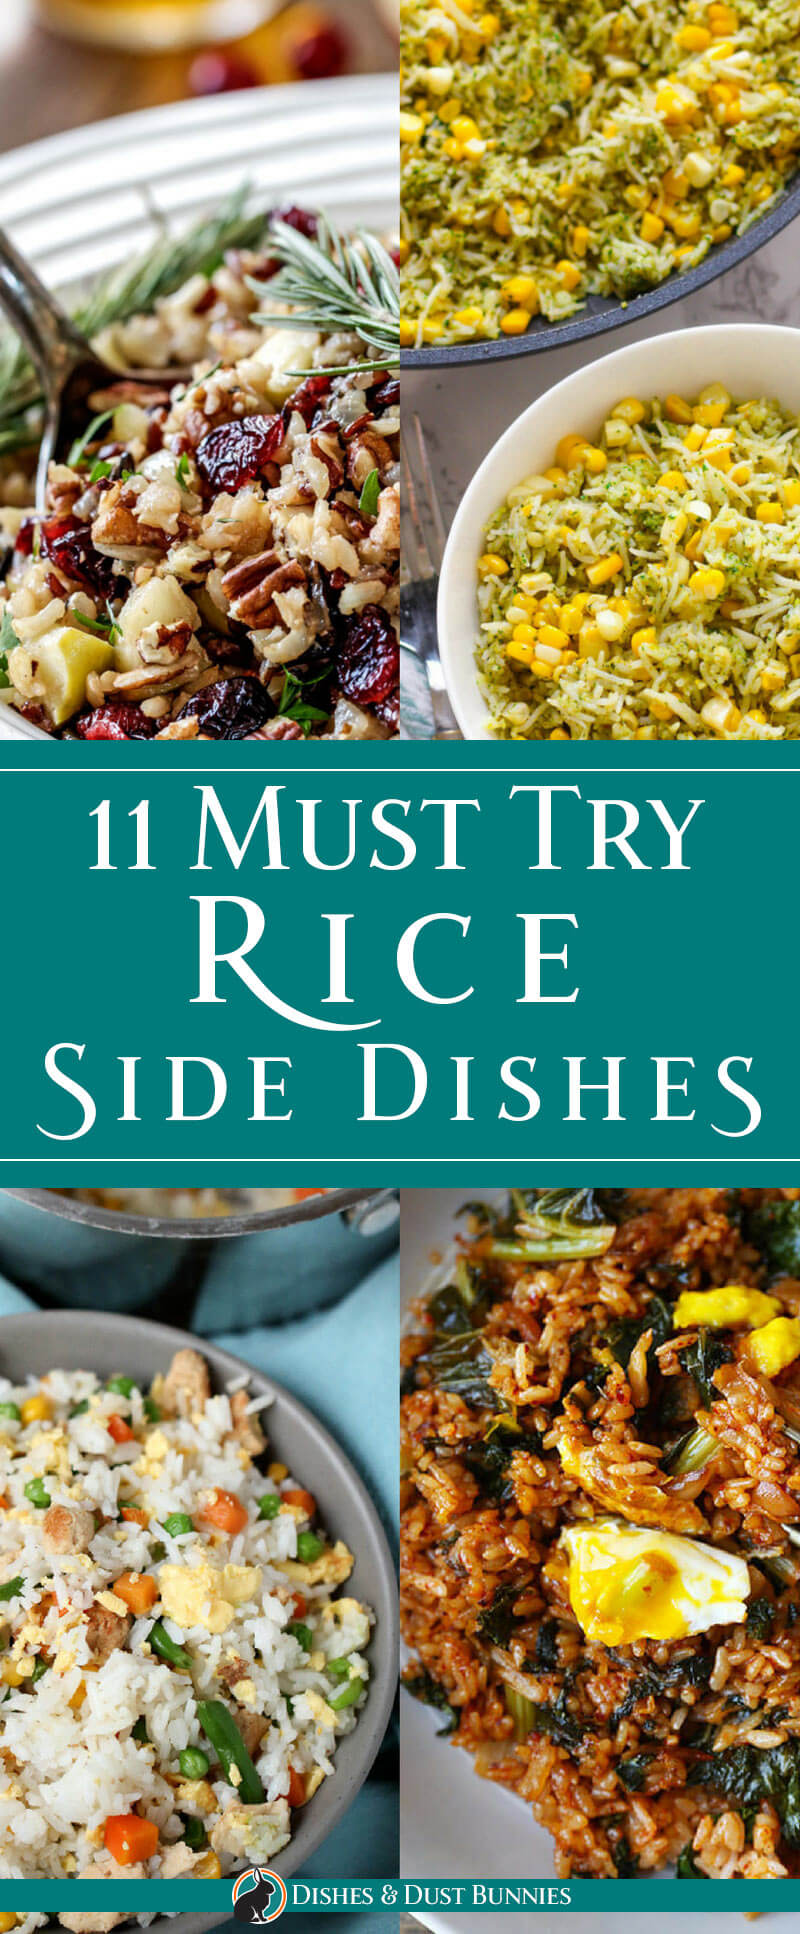 11 Must Try Rice Side Dishes - dishesanddustbunnies.com